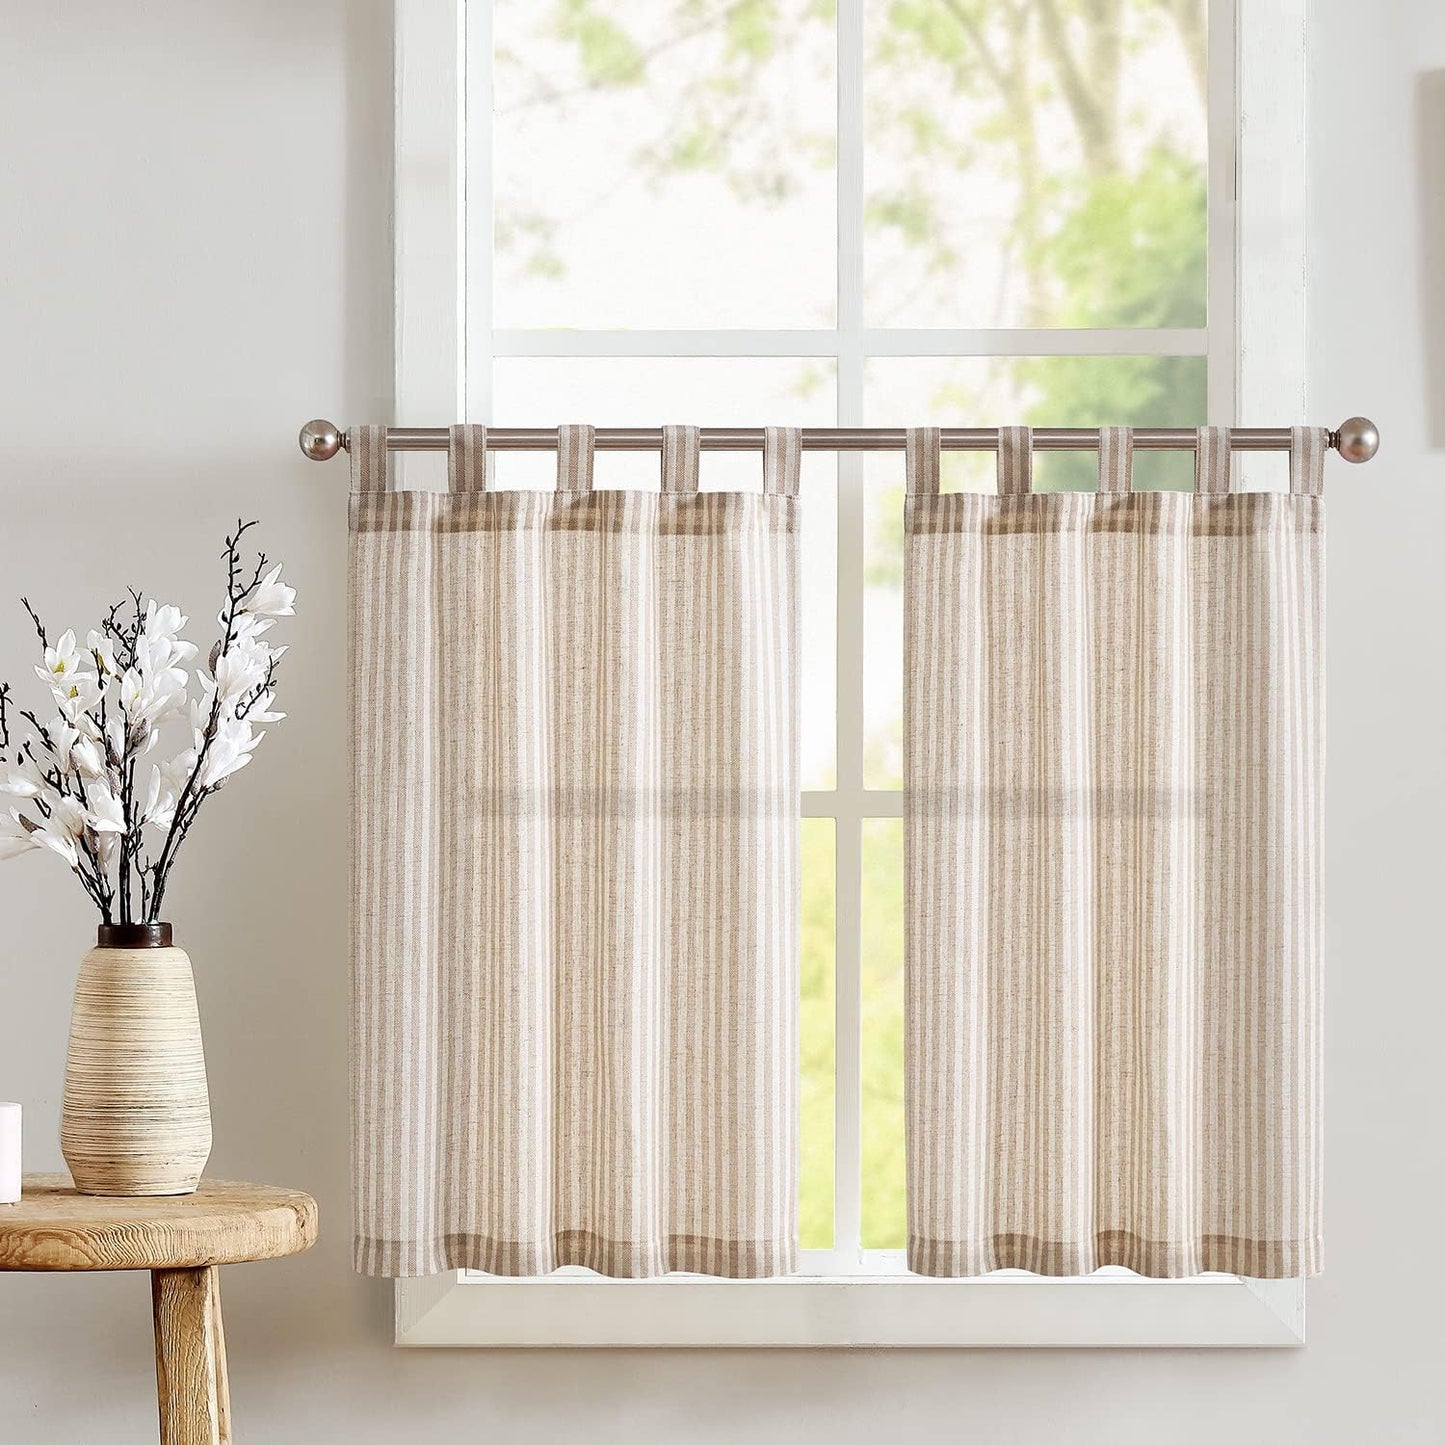 Jinchan Kitchen Curtains Striped Tier Curtains Ticking Stripe Linen Curtains Pinstripe Cafe Curtains 24 Inch Length for Living Room Bathroom Farmhouse Curtains Rod Pocket 2 Panels Black on Beige  CKNY HOME FASHION Tab Top Striped Tan W26 X L24 